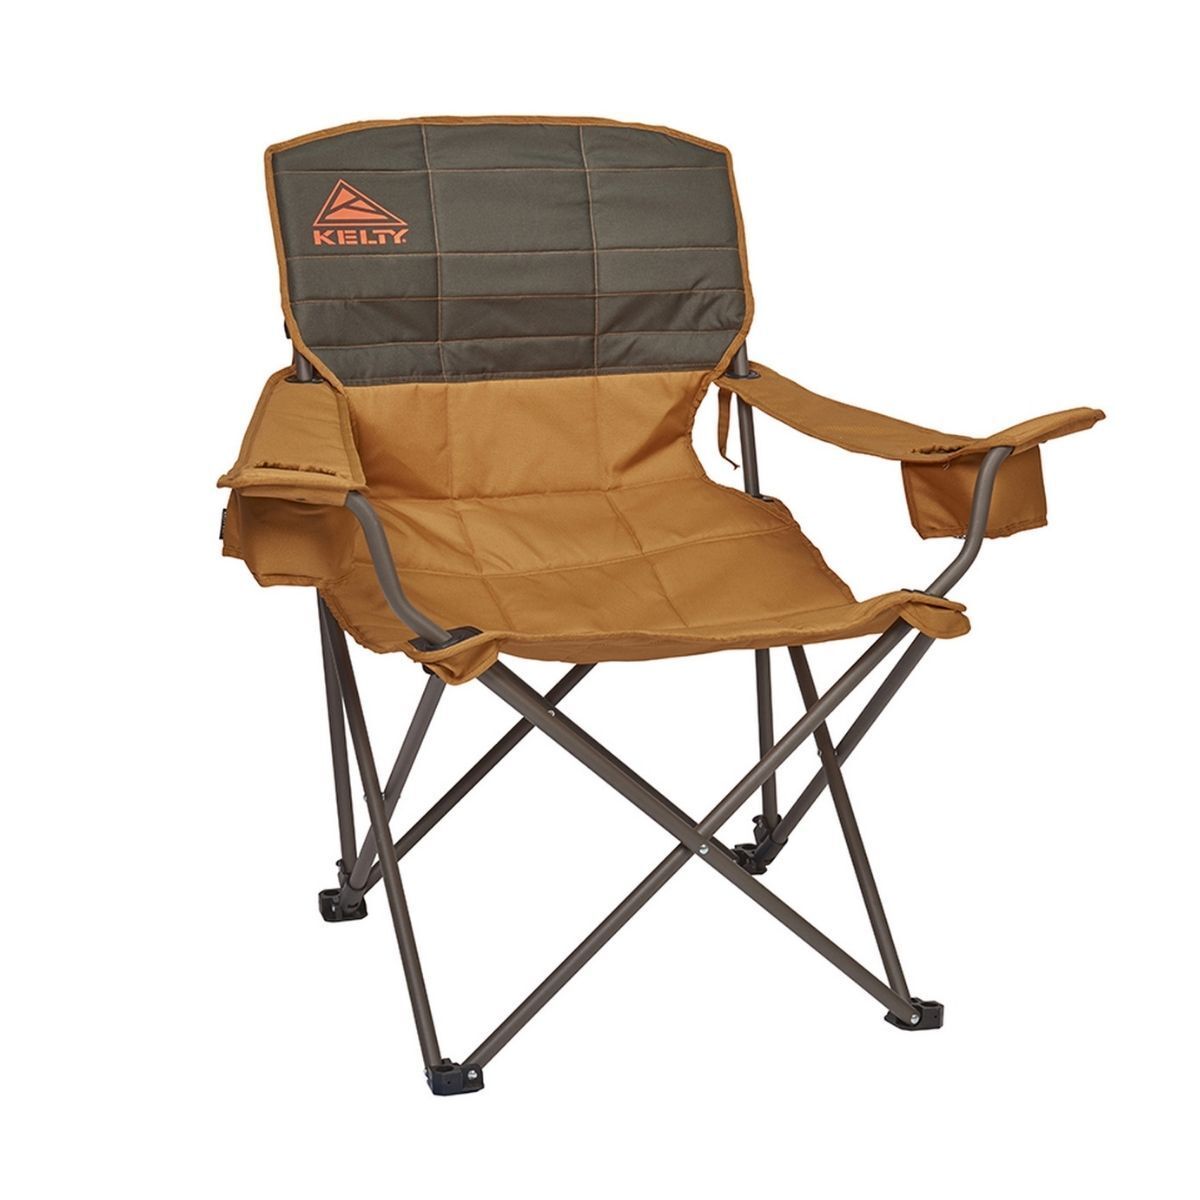 Kelty Deluxe Lounge Chair - Campingstol